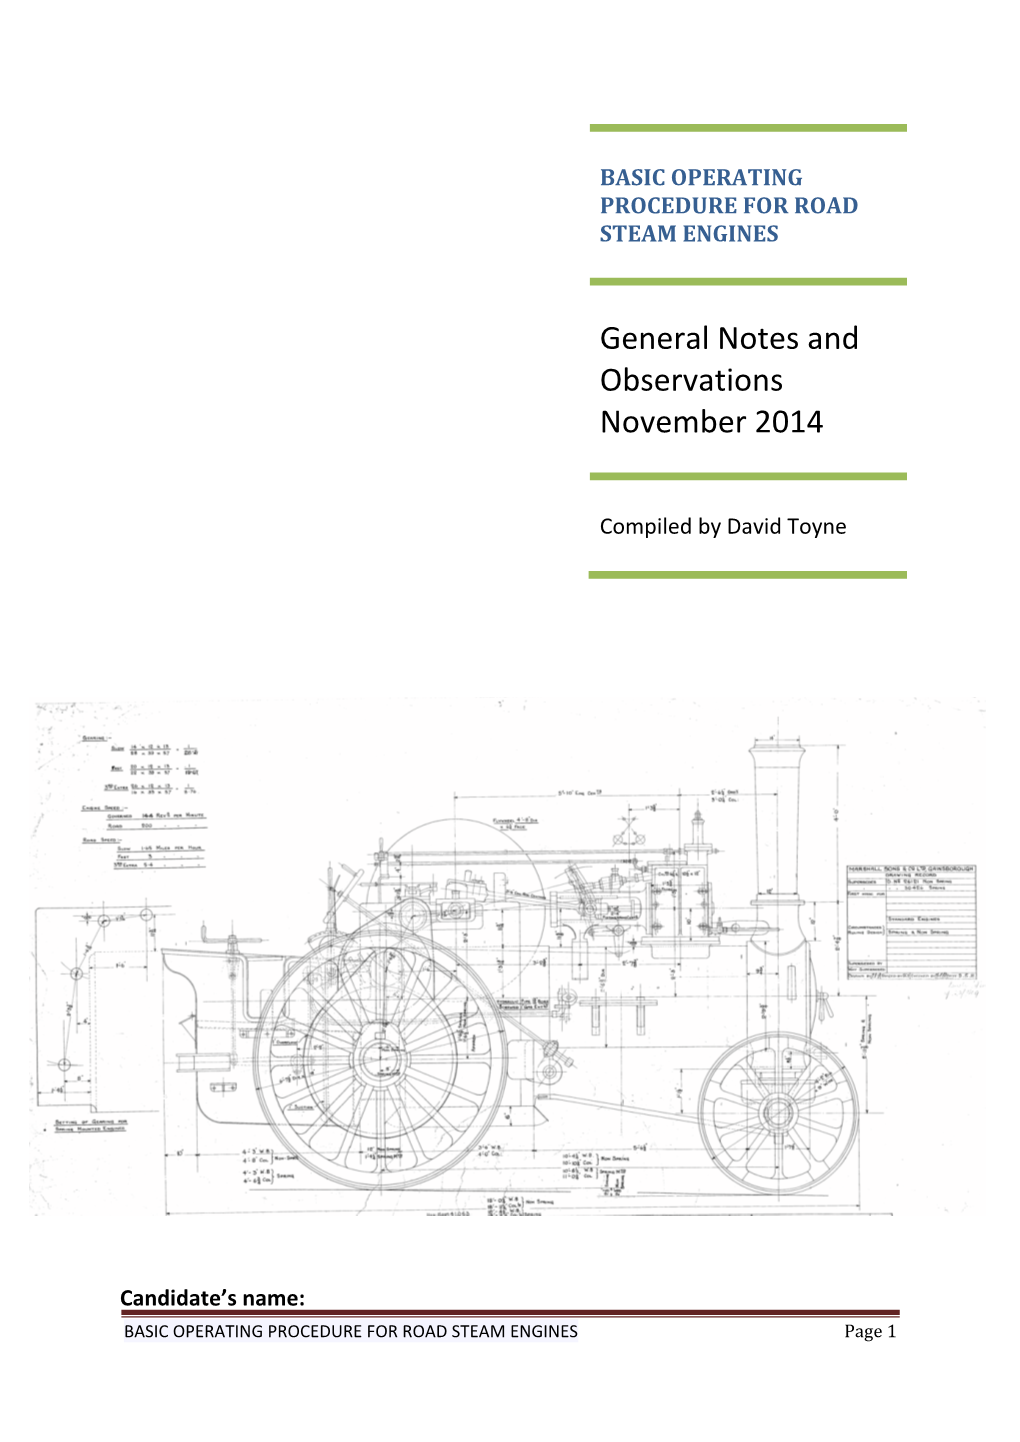 General Operating Procedure for Road Steam Engines